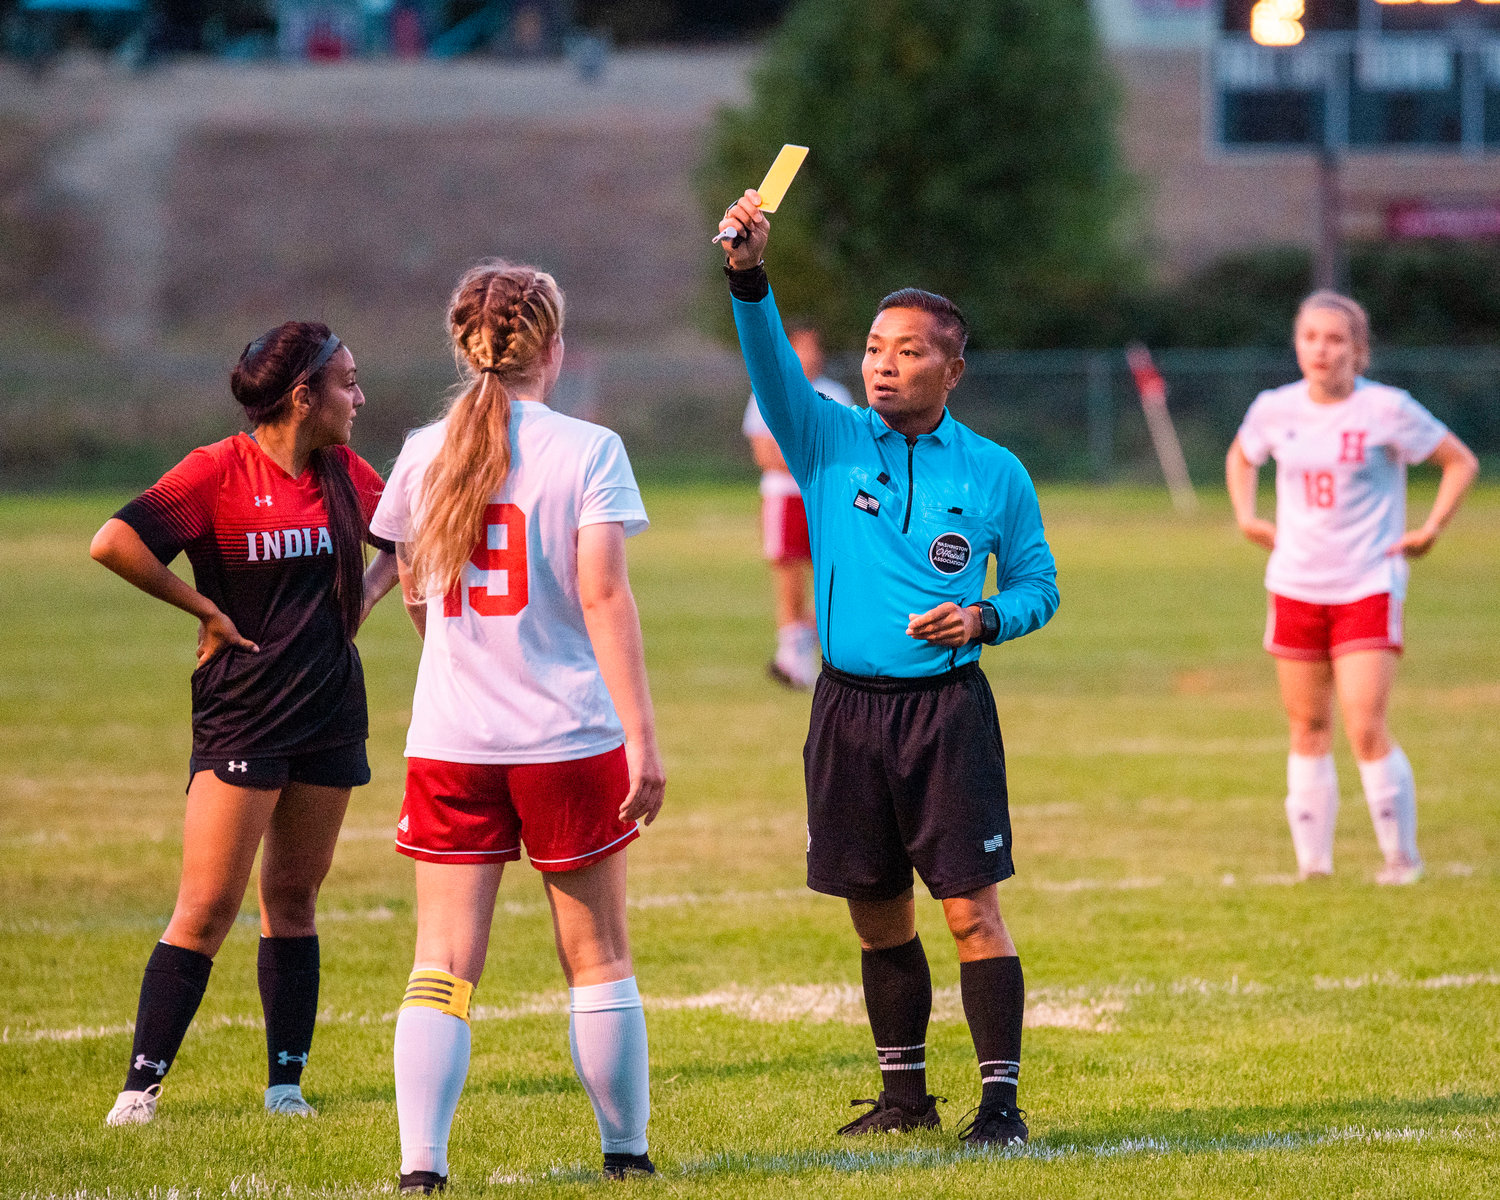 Yellow cards are given out to Hoquiam’s Emma Johnson (19) and Toledo’s Briza Gallegos (4) during a game Tuesday night.